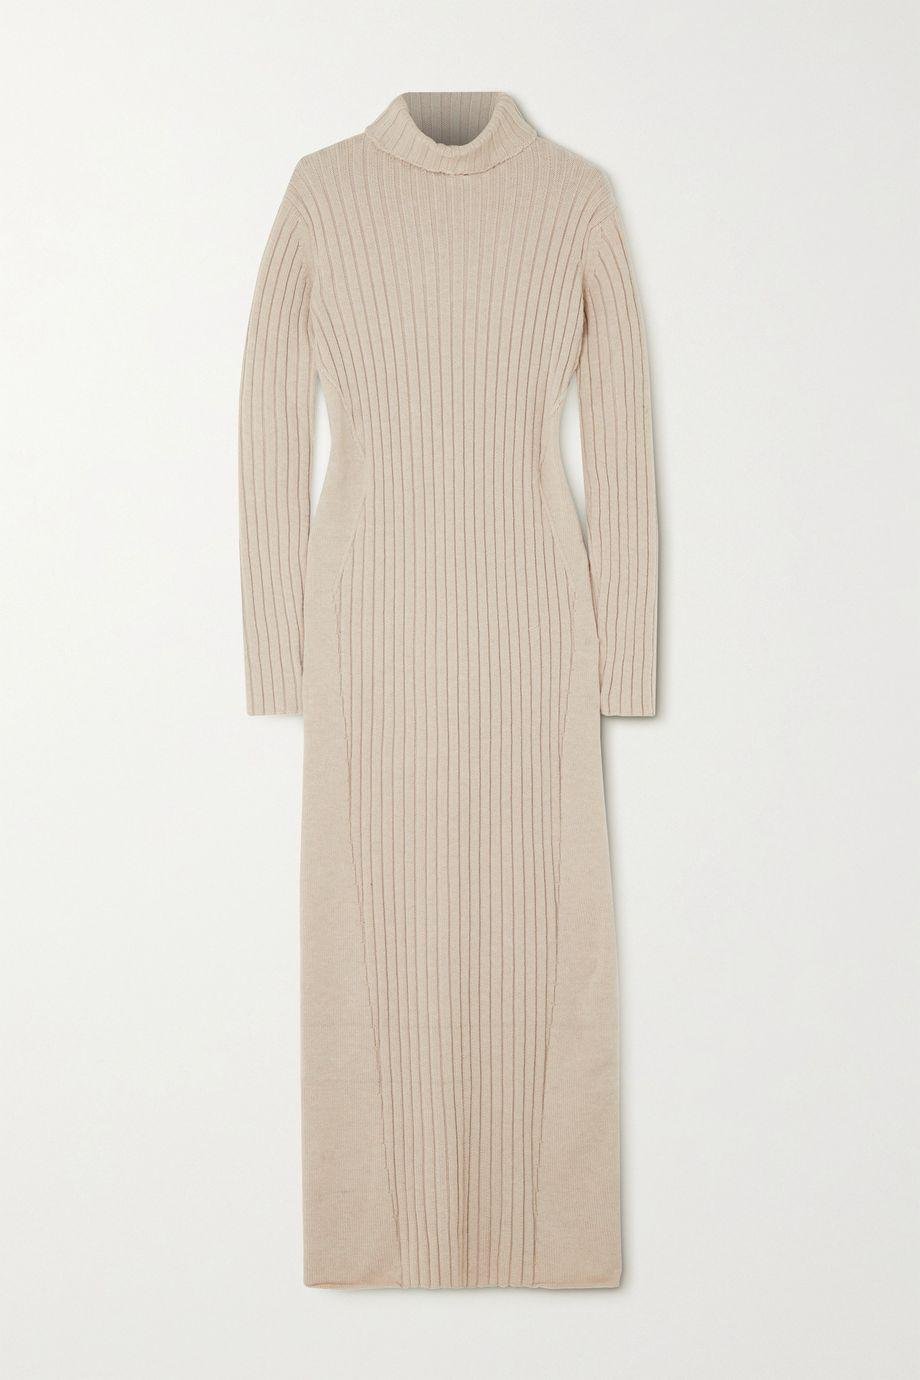 Paneled ribbed wool turtleneck maxi dress by CAES